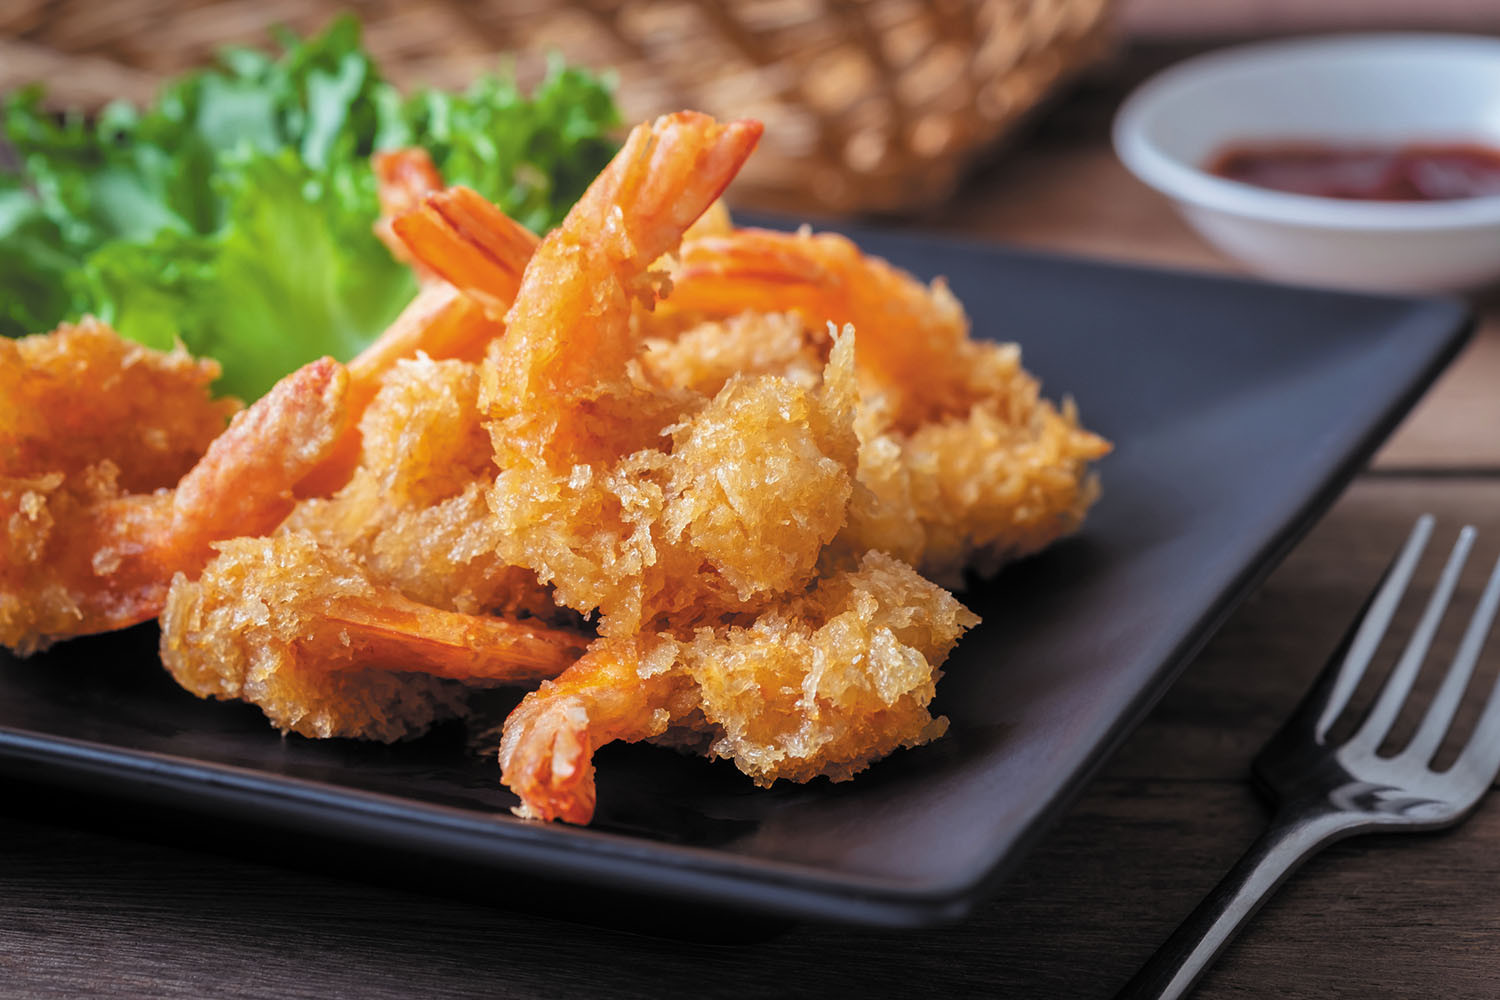 6 Tips to Make Healthy Fried Food